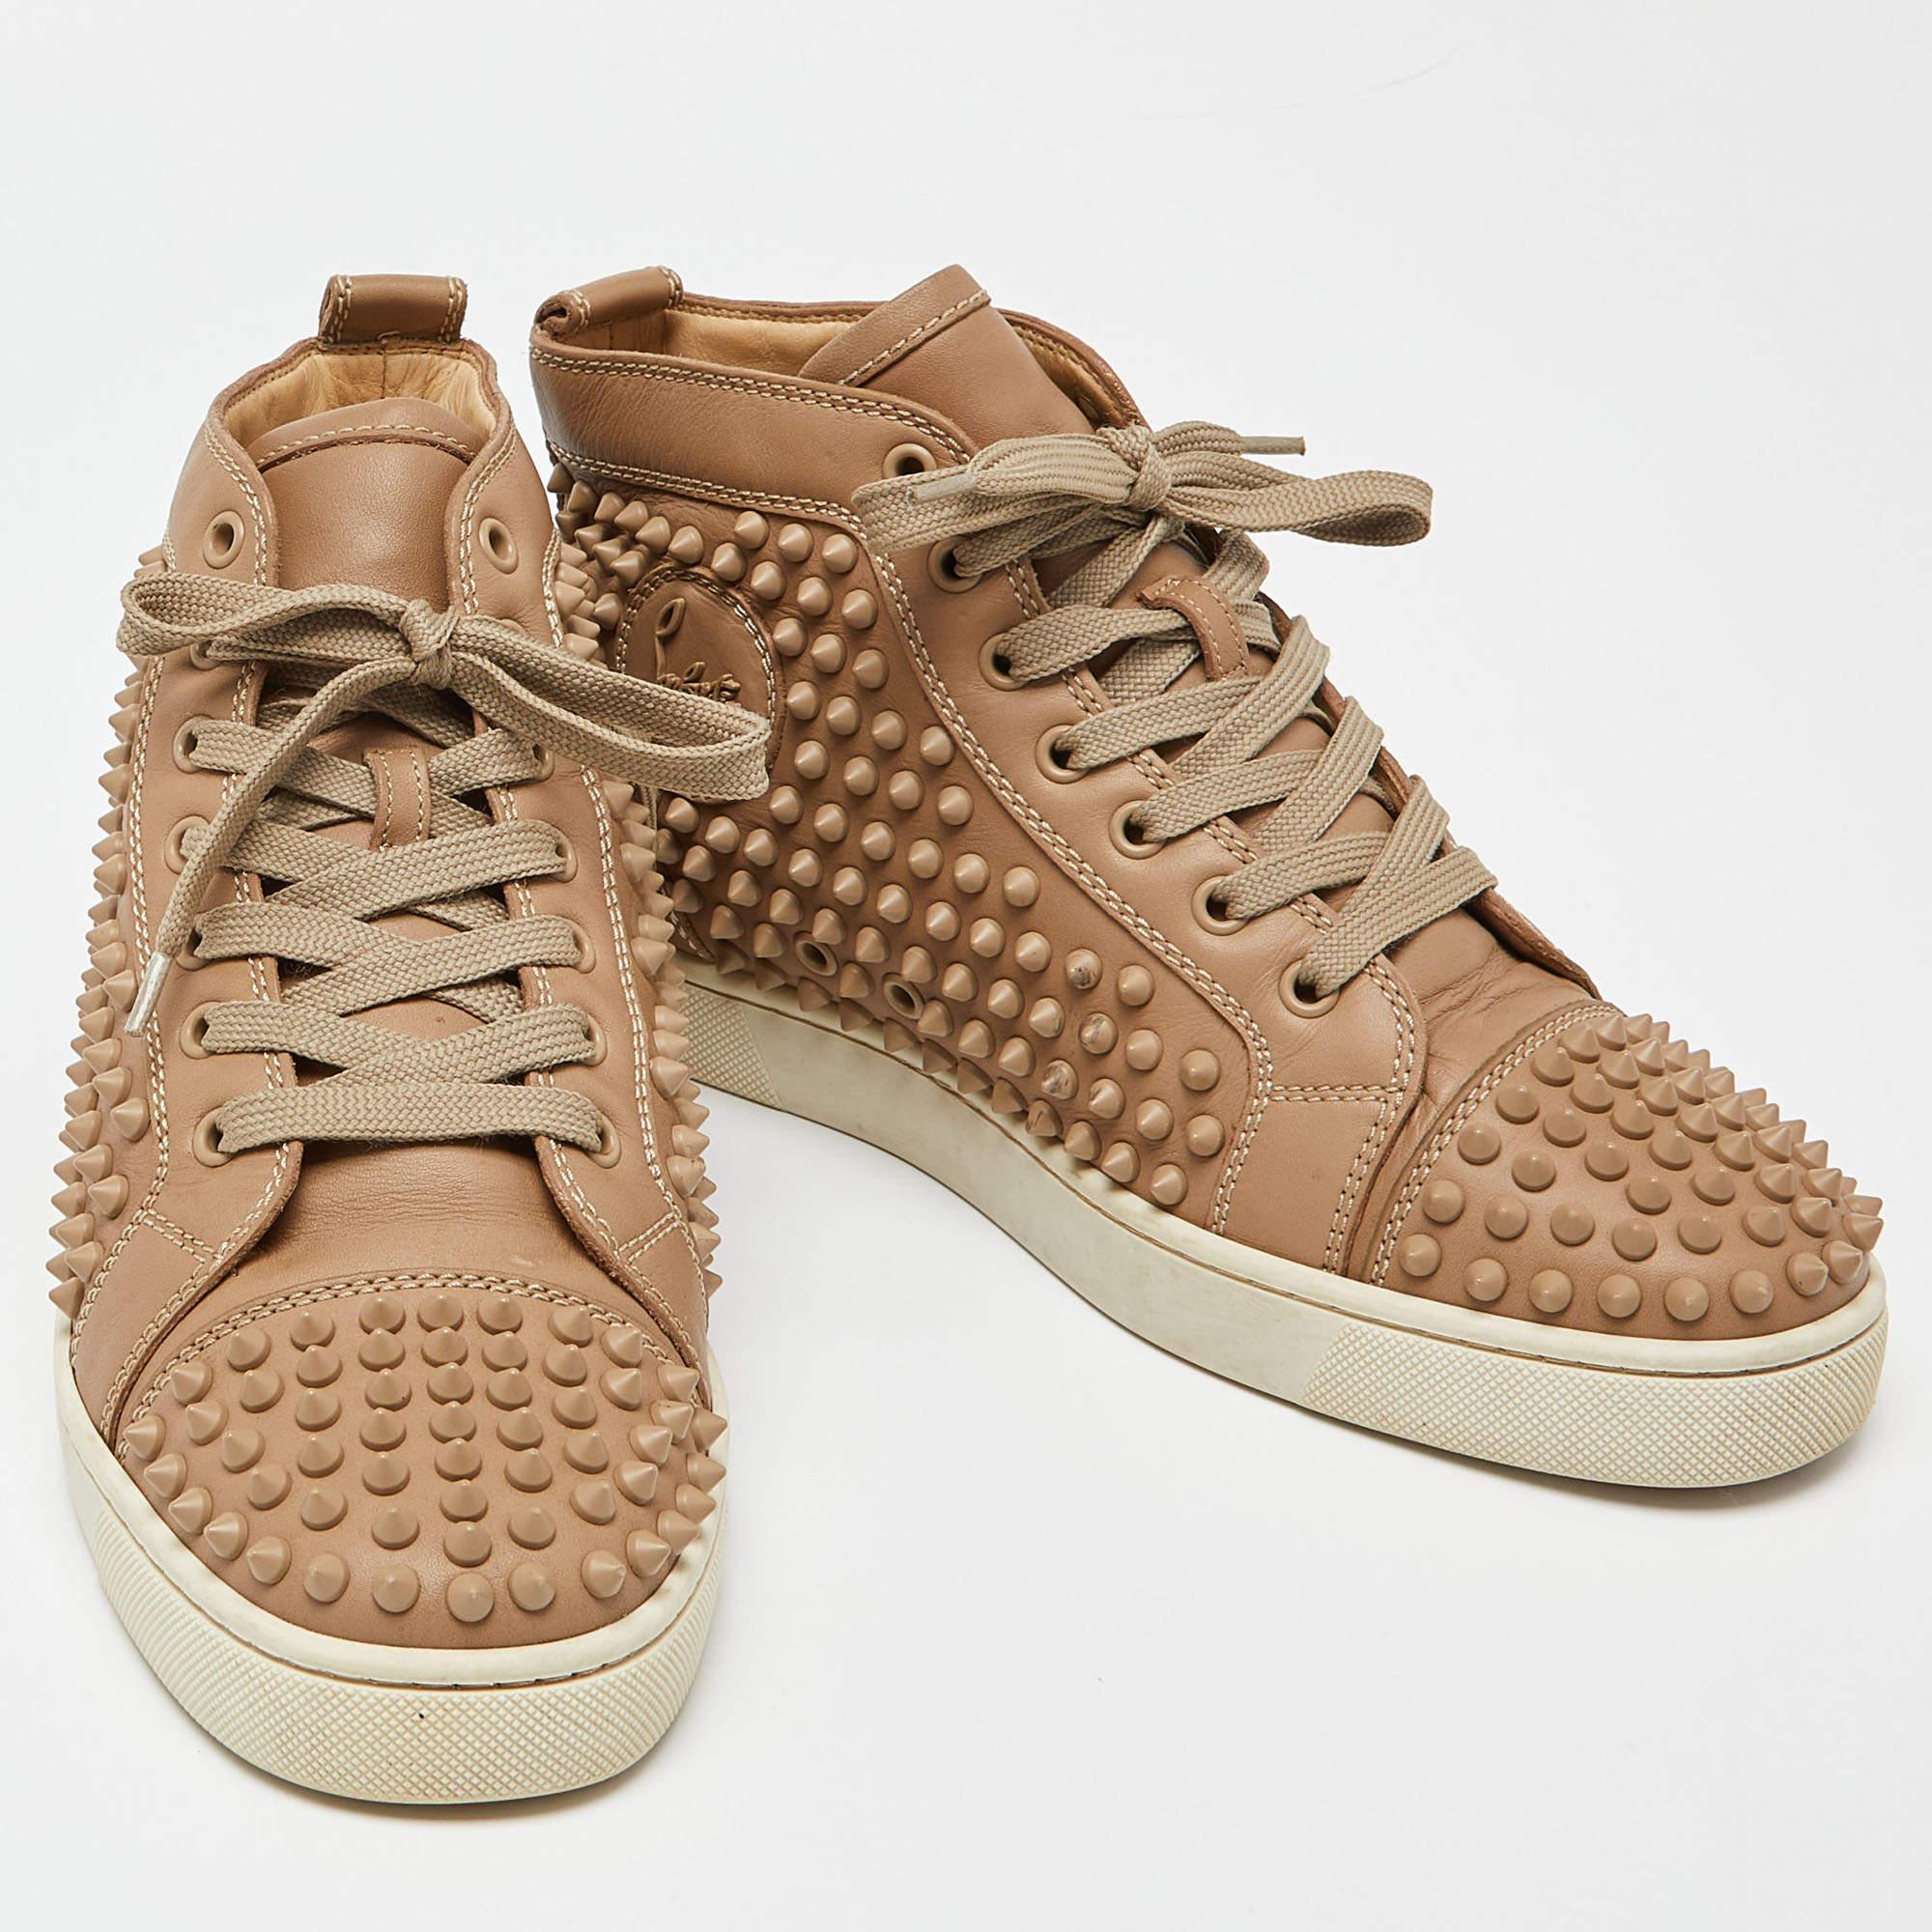 Christian Louboutin infuses its creations with attractively rare designs that keep them high on appeal and trend. These Louis Spikes high-top sneakers is such a design. They have been crafted using leather with gold-toned spikes adorning the